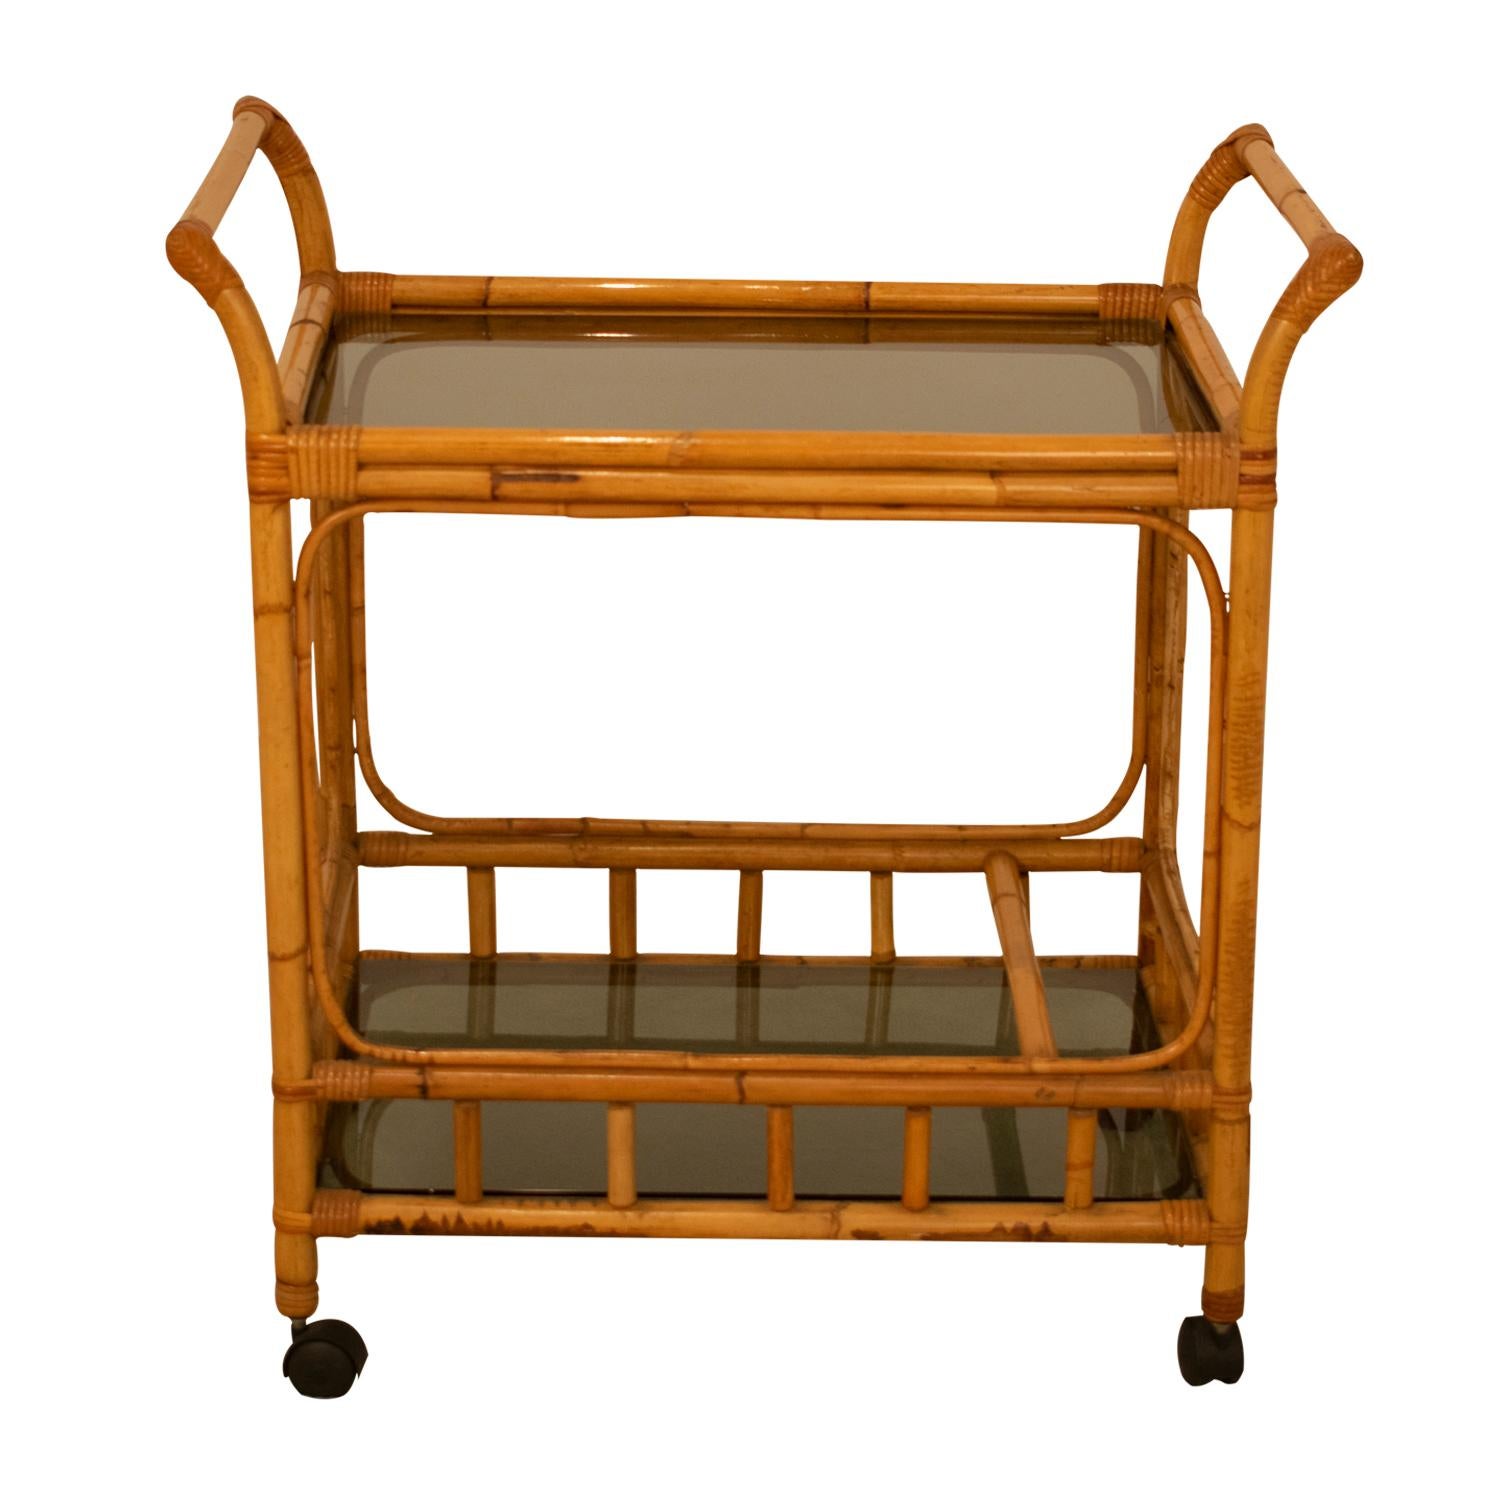 Bamboo and translucent glass drinks trolley in gray, Spanish, 1970s.